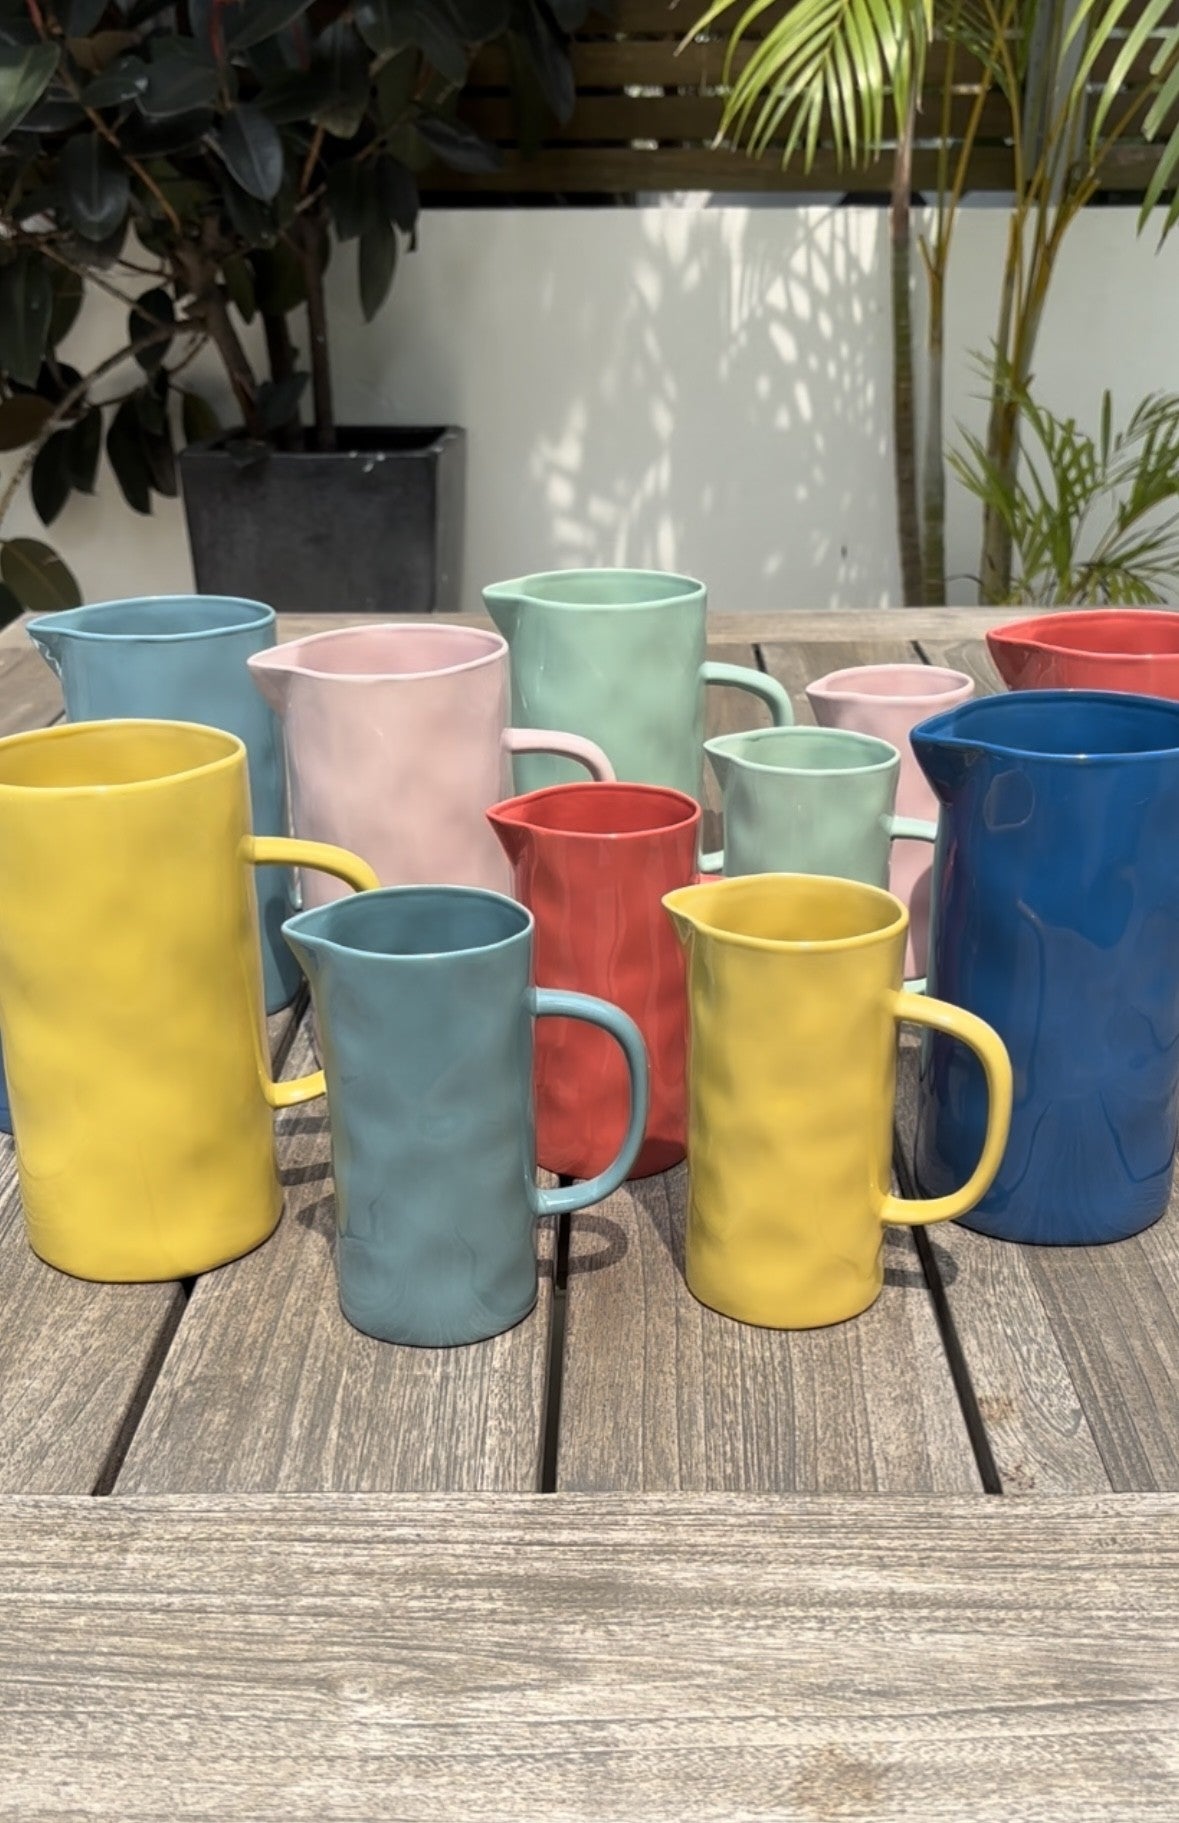 A selection of colourful hand-painted jugs